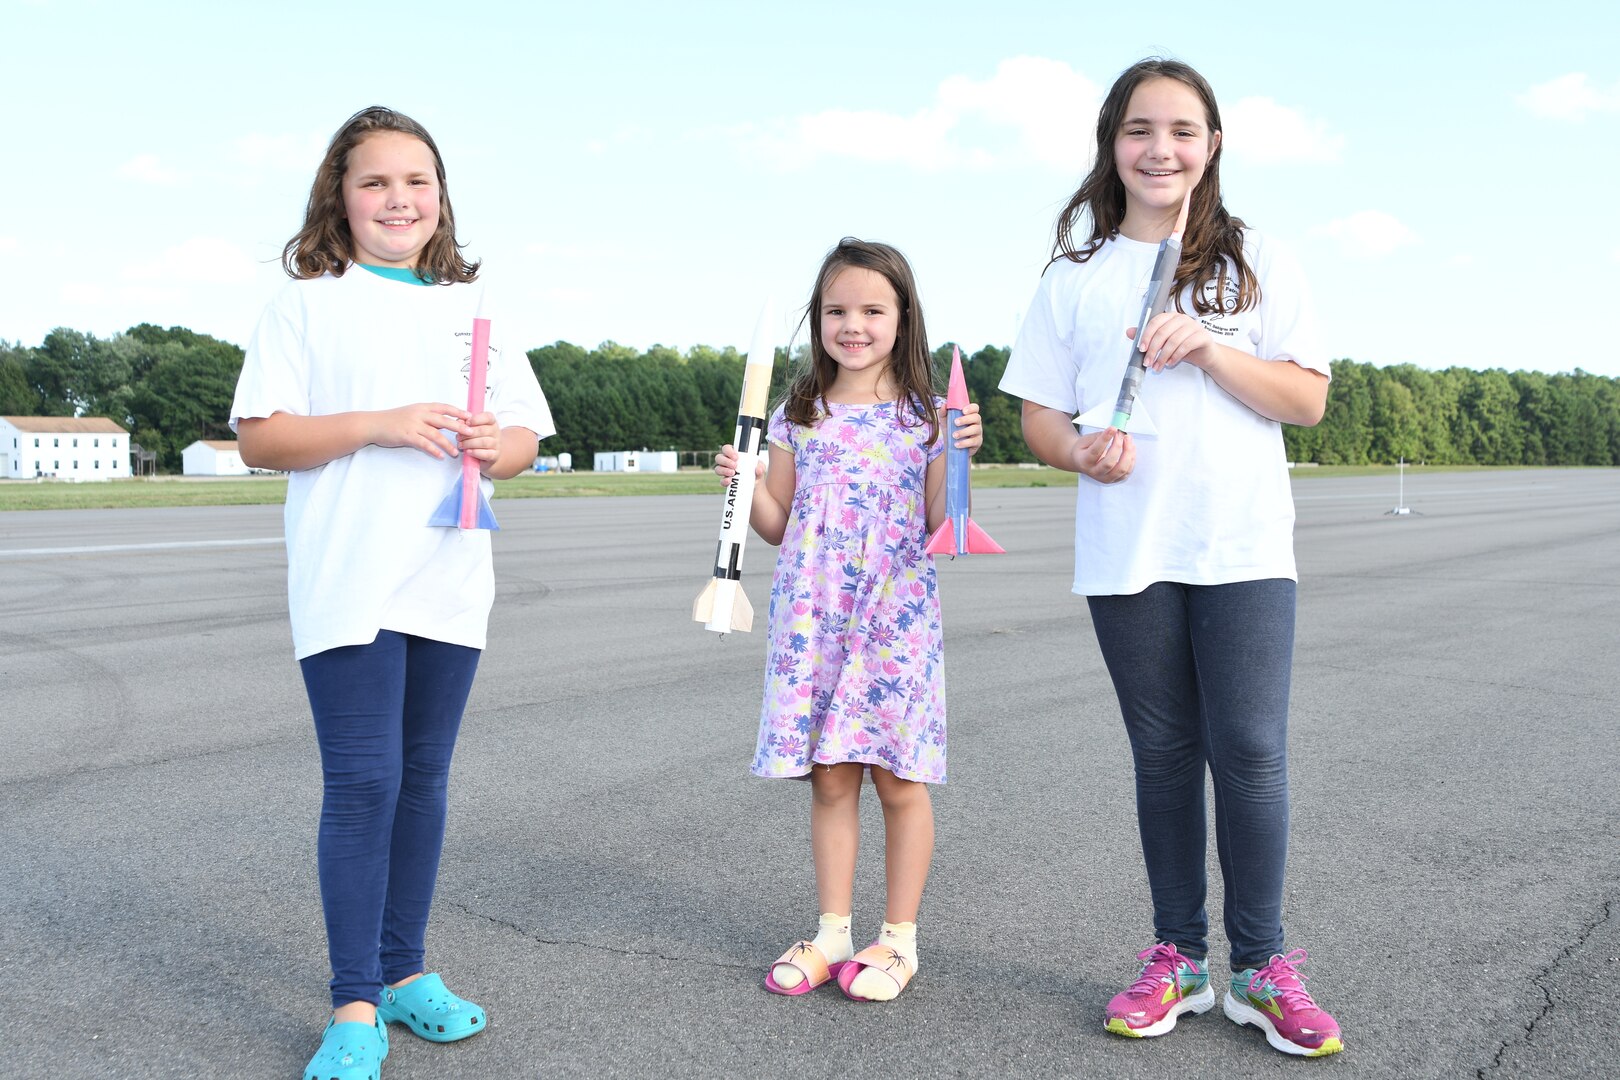 IMAGE: Centennial Rocket Competition participants with their rockets.